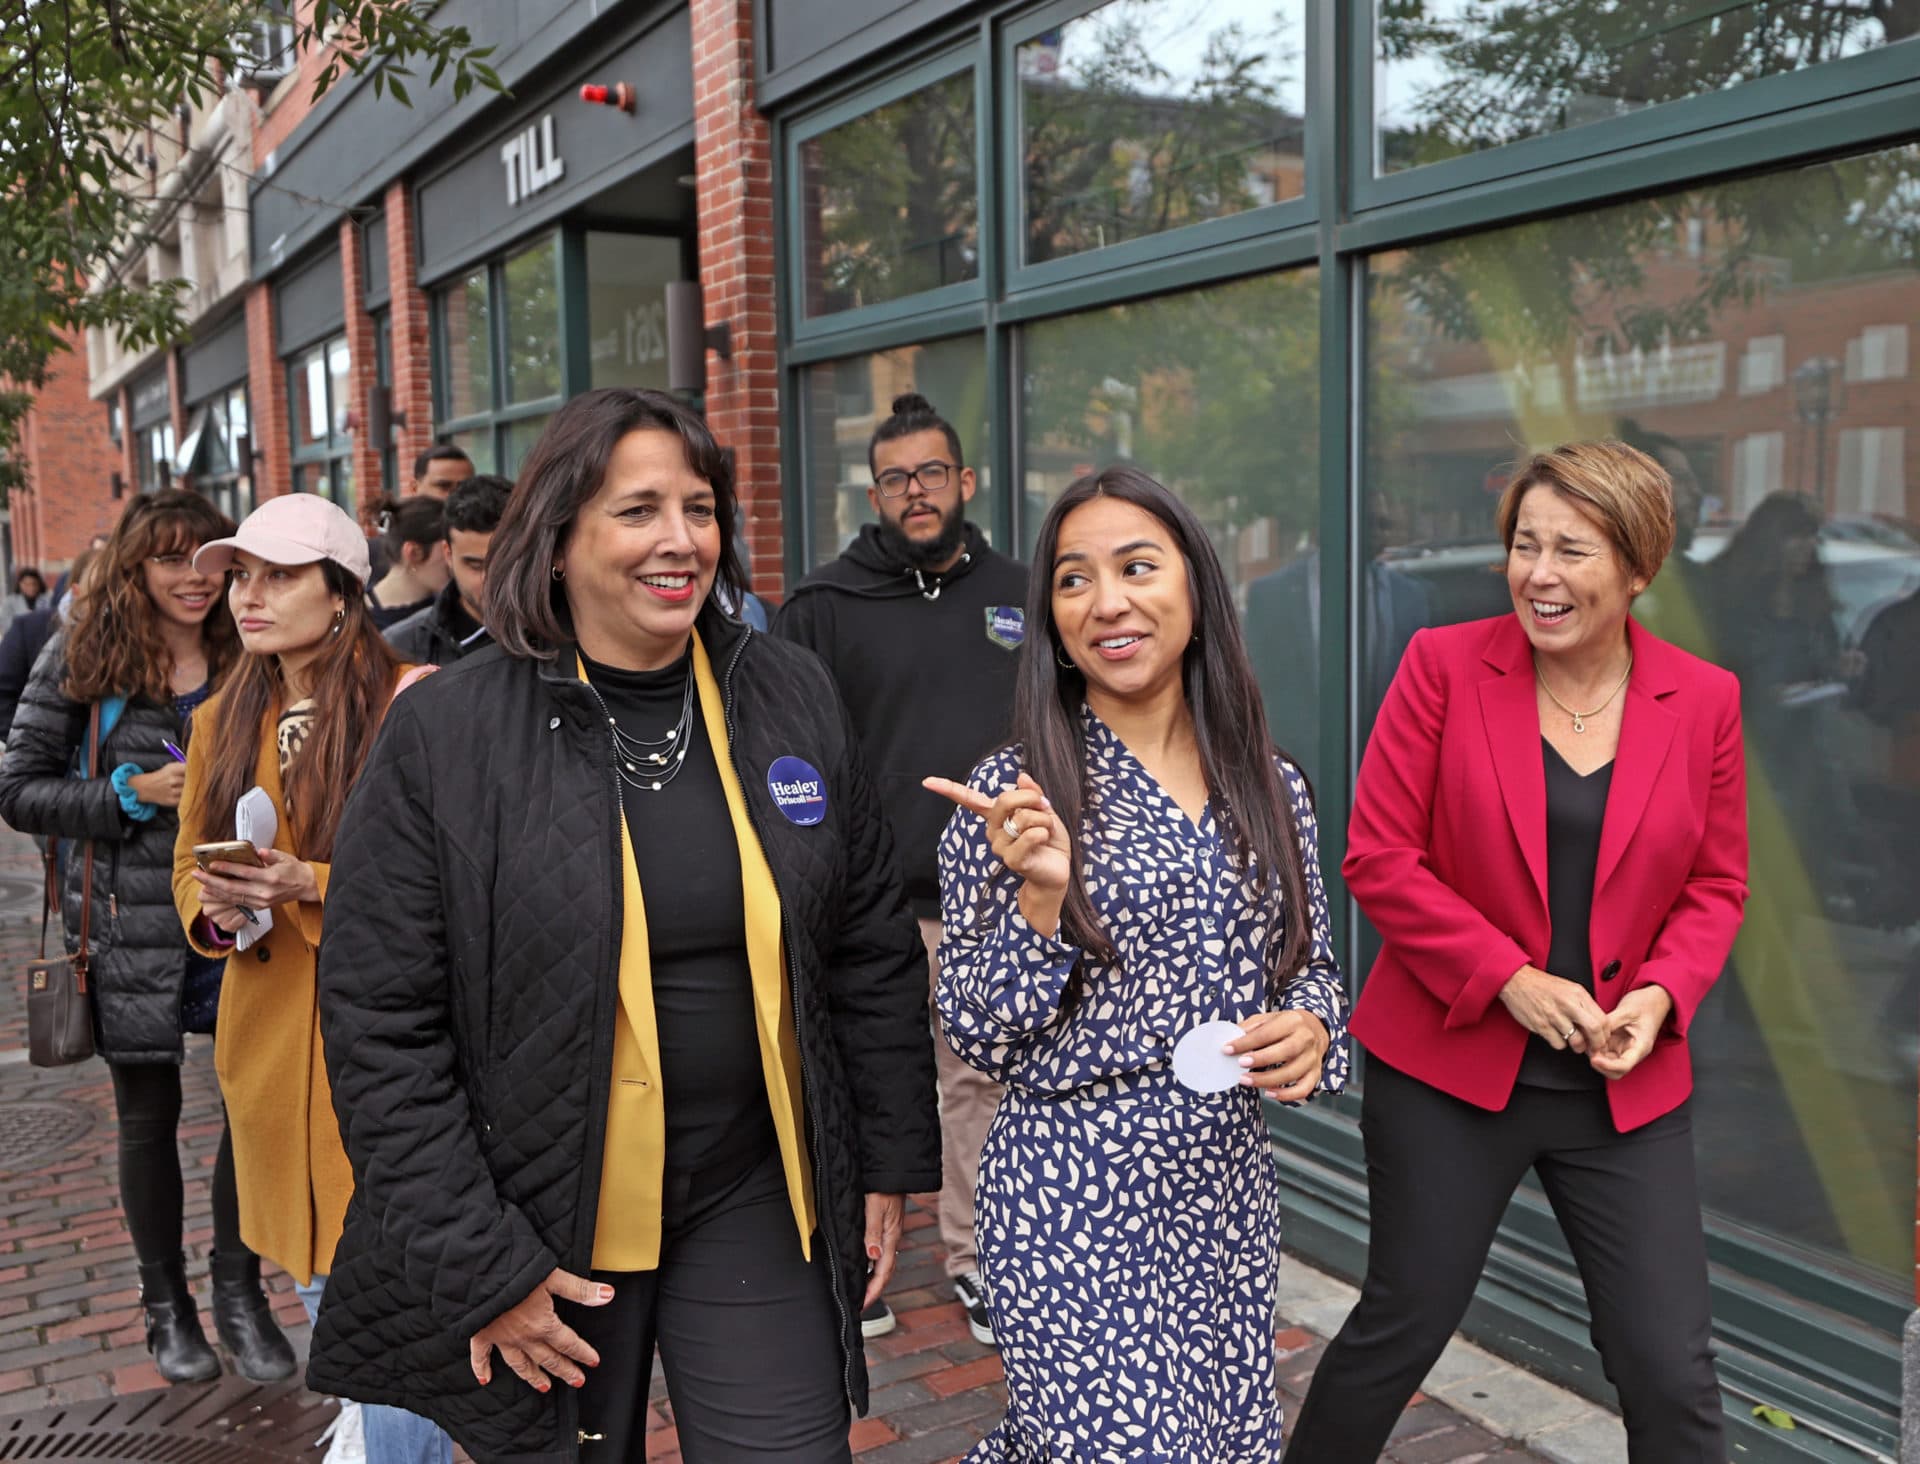 Gubernatorial candidate Maura Healey, far right, went on a small business walk in Chelsea with Kim Driscoll, left, and Chelsea City Councilor and candidate for State Representative Judith Garcia, center. (David L. Ryan/The Boston Globe via Getty Images)